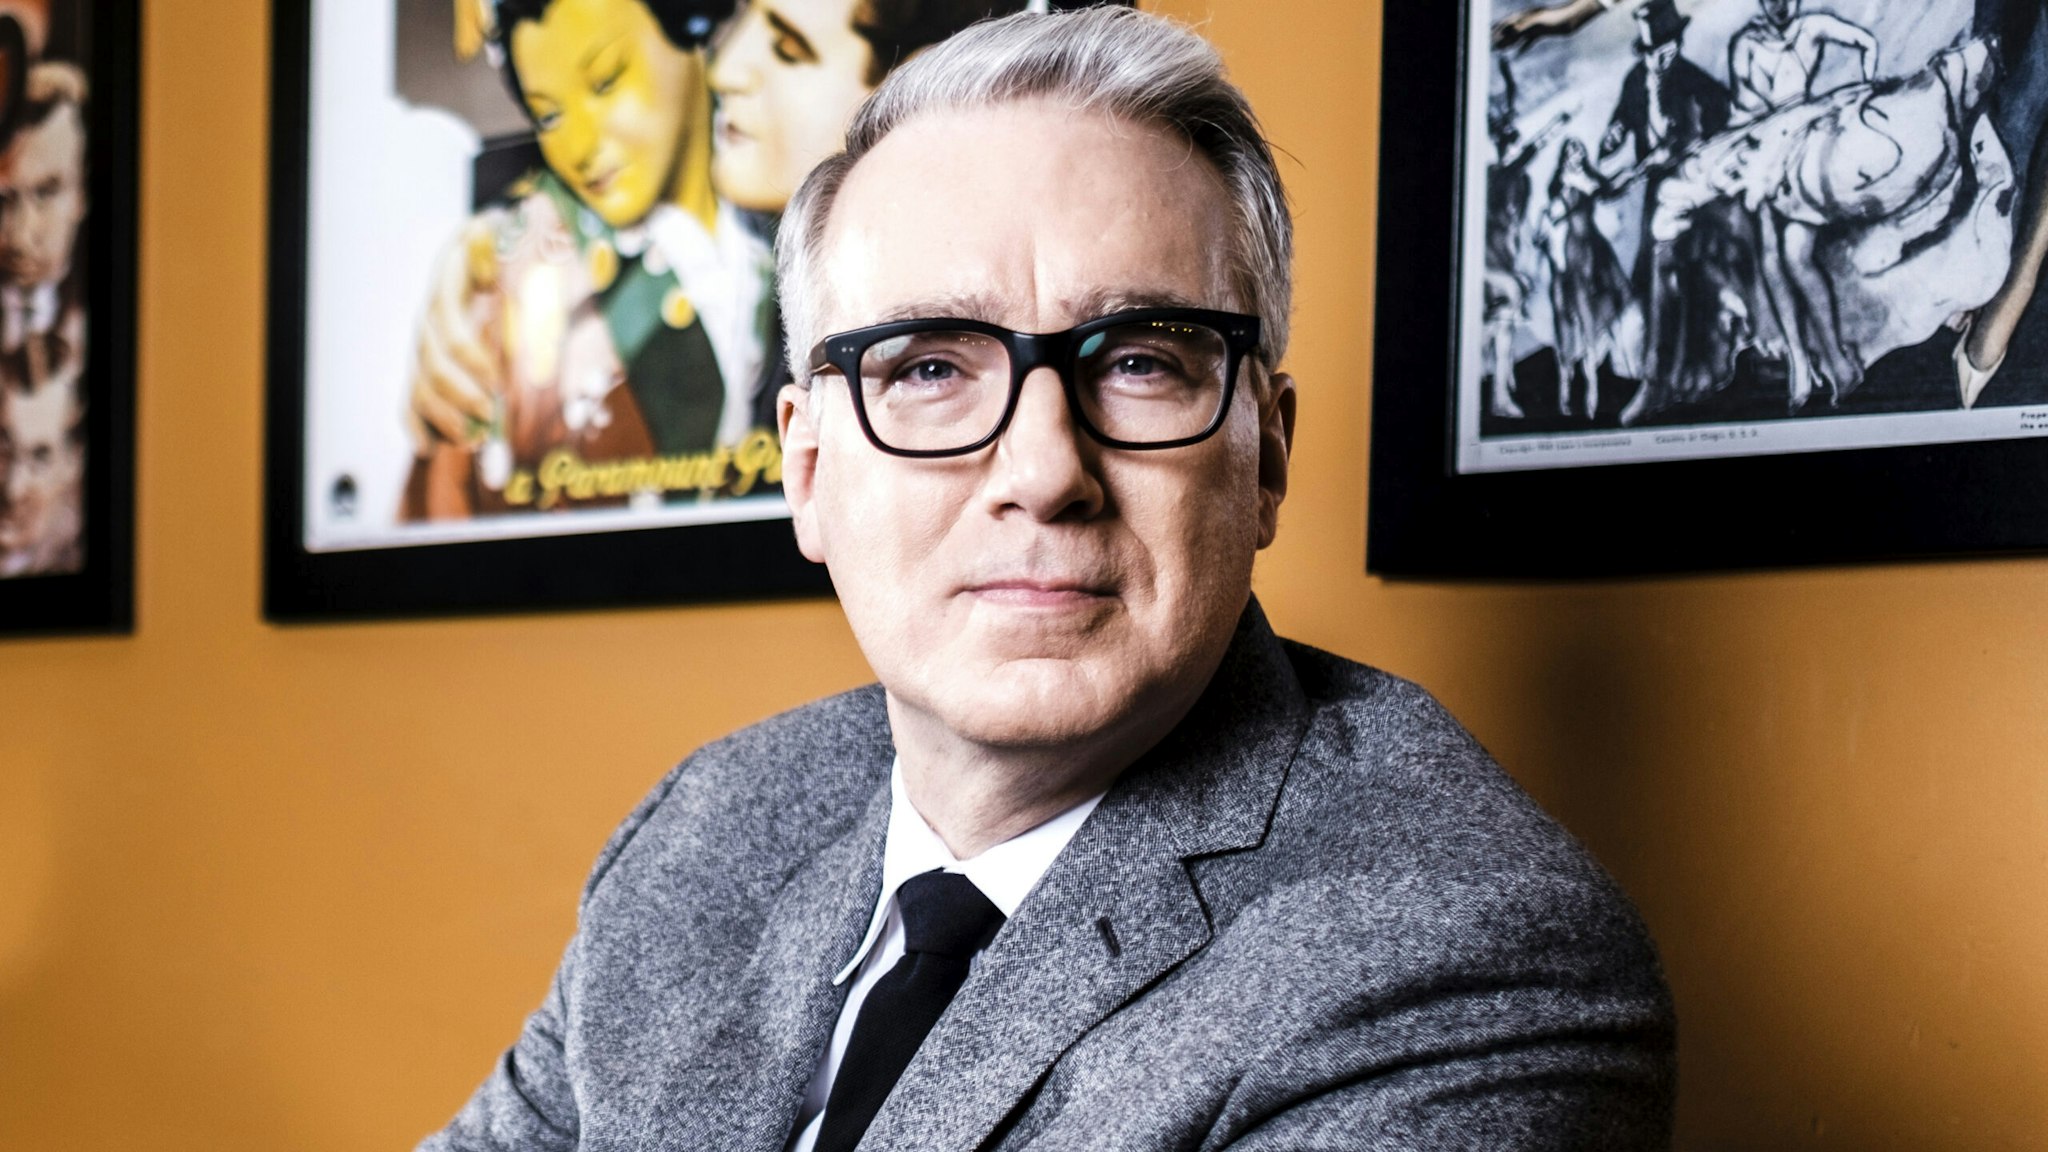 Keith Olbermann, TV personality and host of GQ's 'The Resistance', photographed in New York City on February 7, 2017.